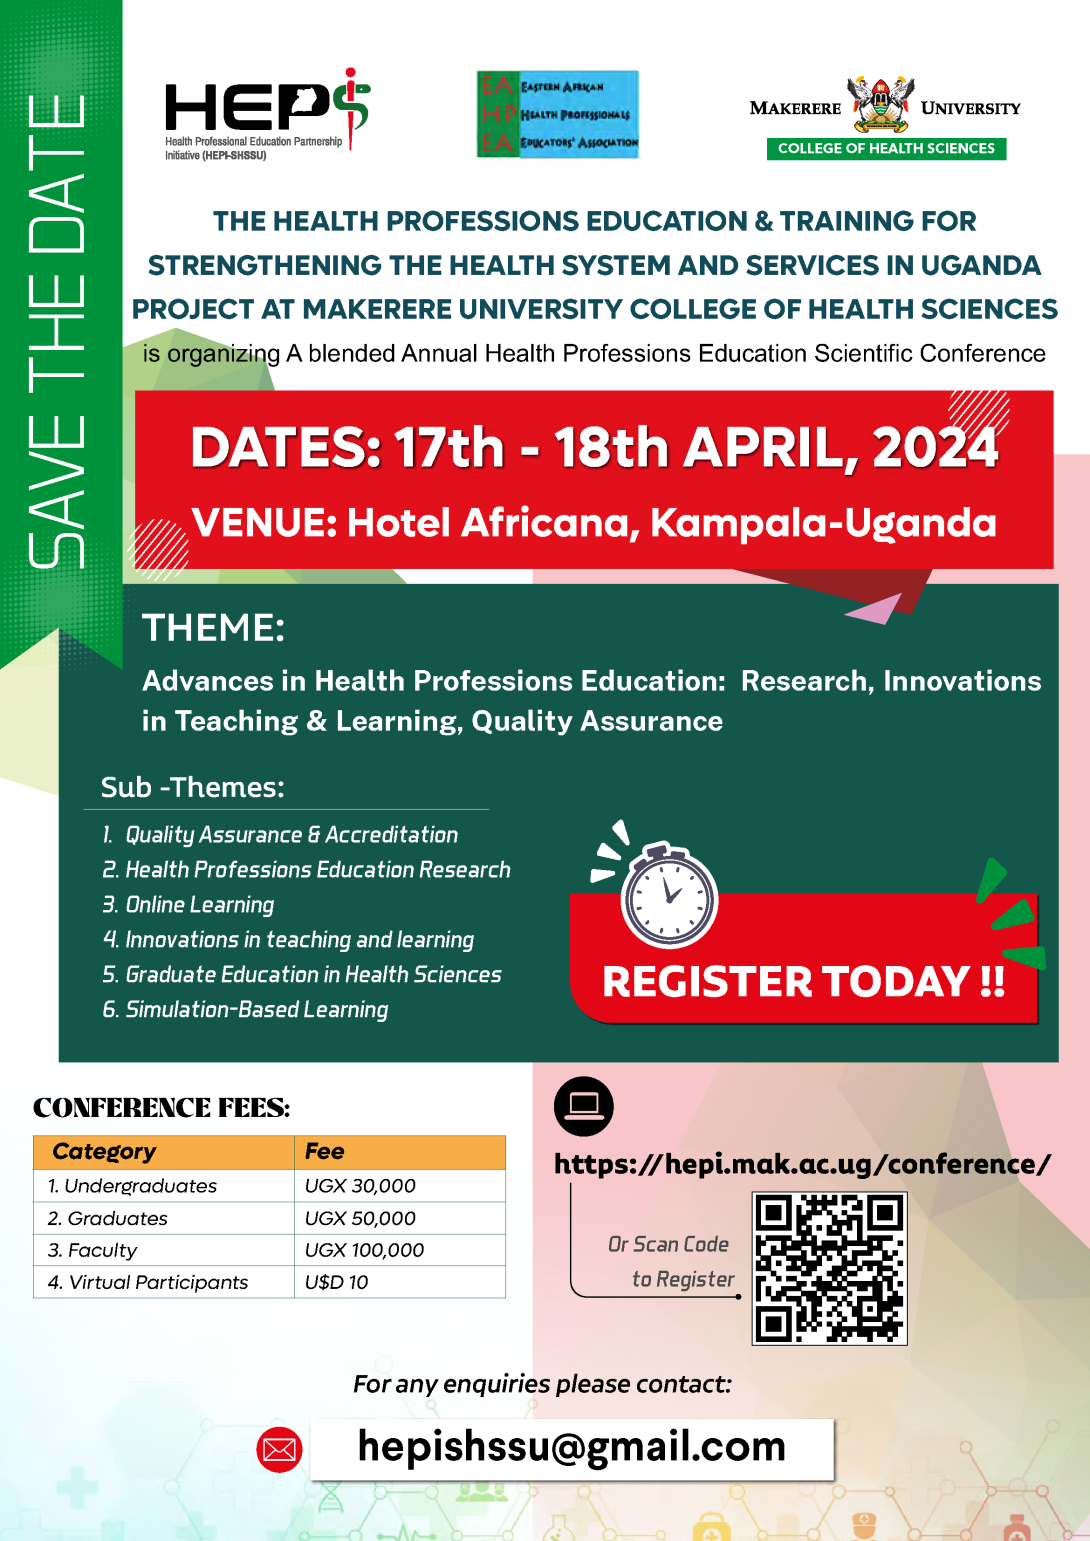 Health Professions Education and Training for Strengthening the Health System and Services in Uganda Project (HEPI-SHSSU), Makerere University College of Health Sciences (MakCHS) Annual Health Professions Education Scientific Conference, "Advances in Health Professions Education:  Research, Innovations in Teaching & Learning, Quality Assurance", 17th - 18th April 2024, Hotel Africana, Kampala Uganda, East Africa.